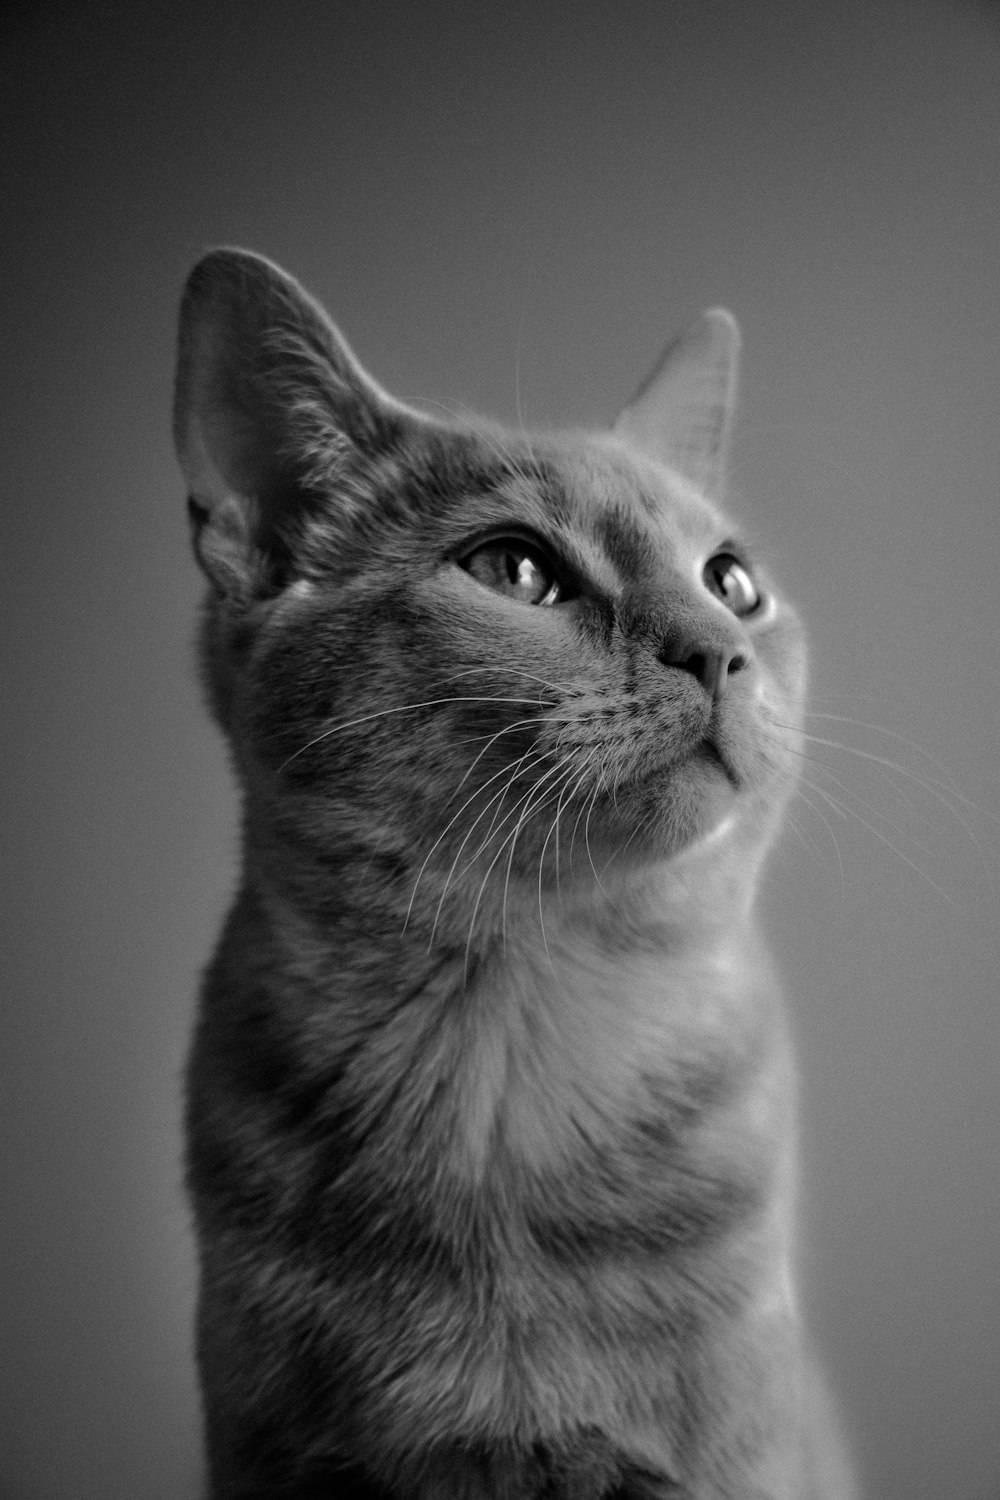 grayscale photo of cat with eyes closed